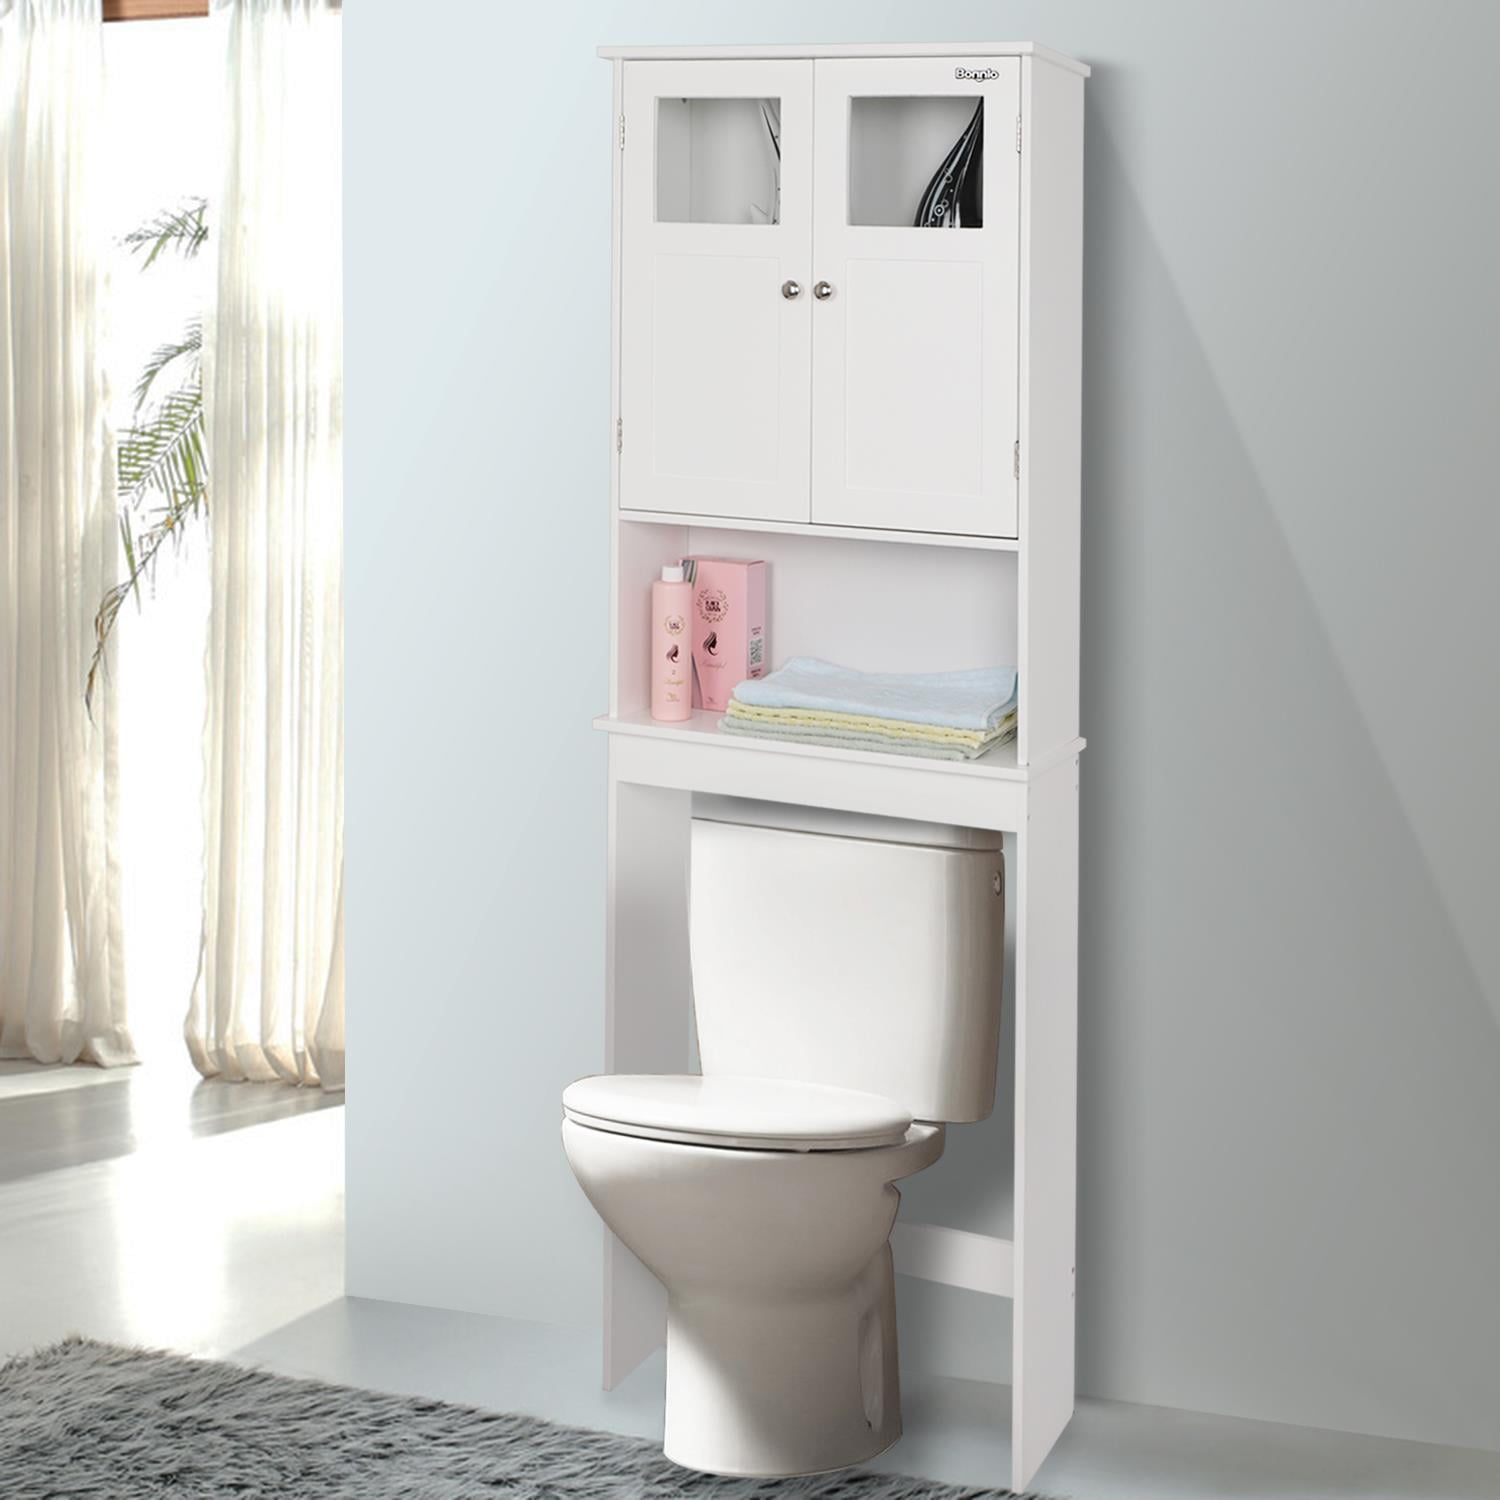 Ktaxon Bathroom Over Toilet Space Saver, Wall-Mounted Standing Double ...